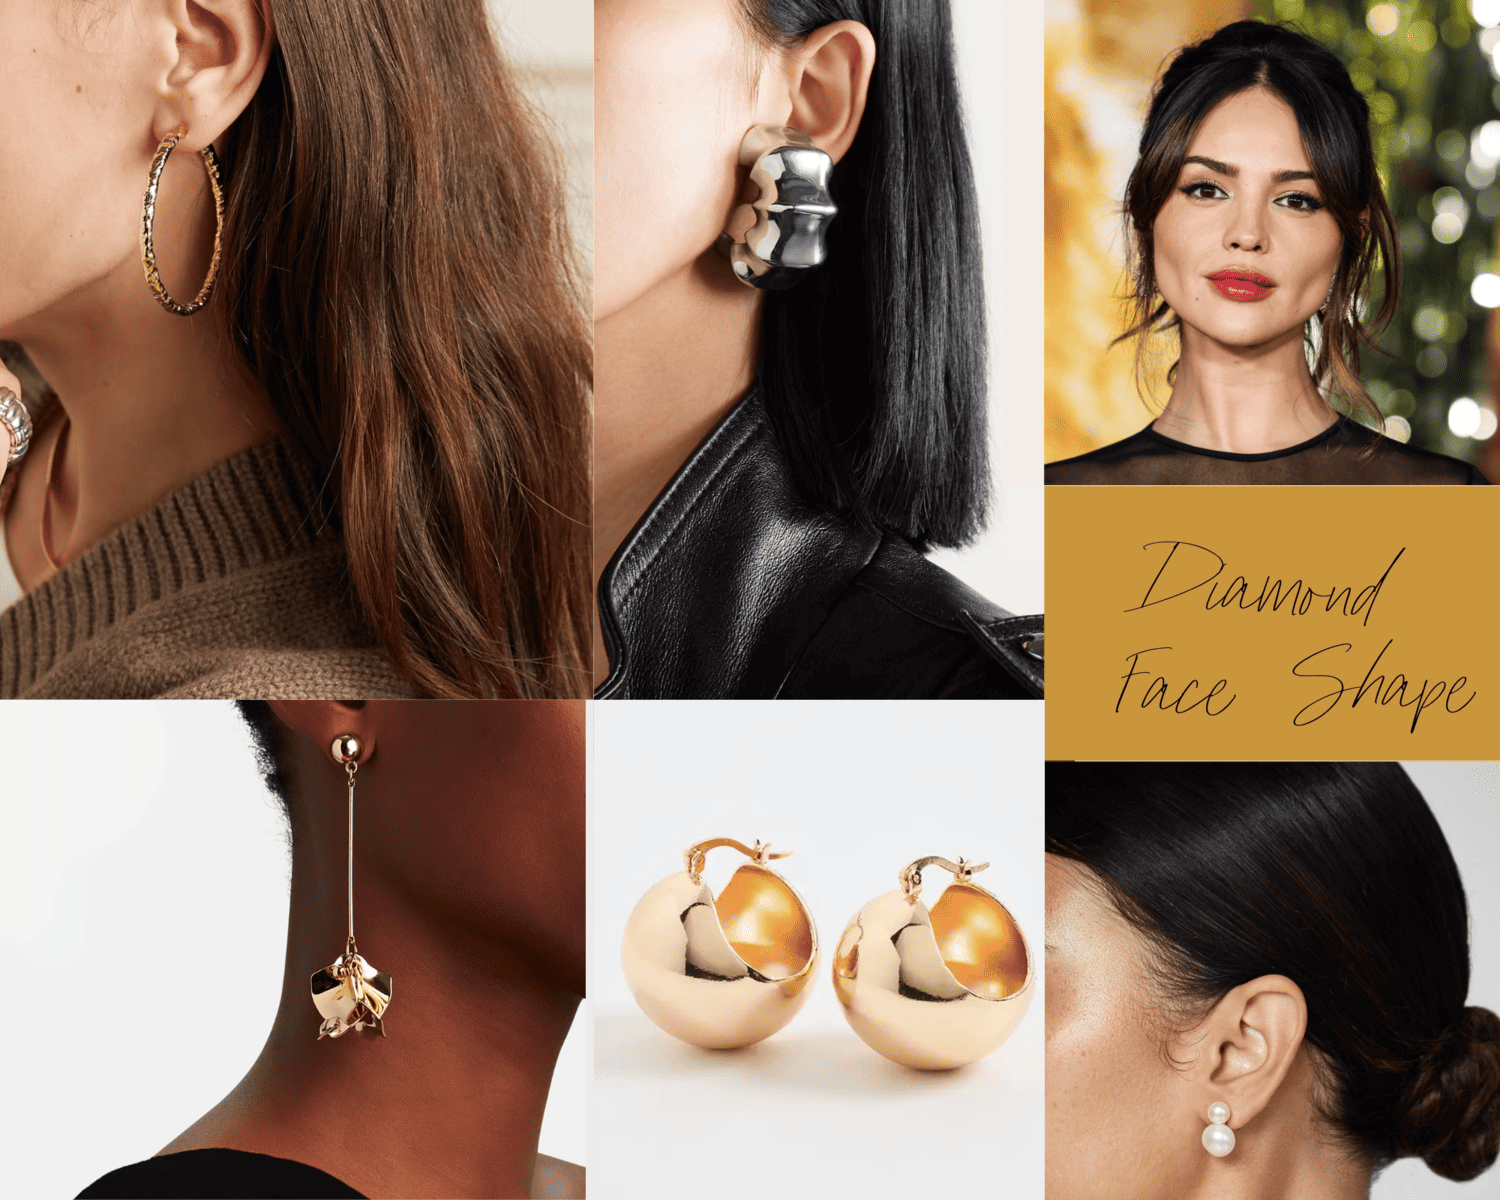 the right earrings for diamond shaped face